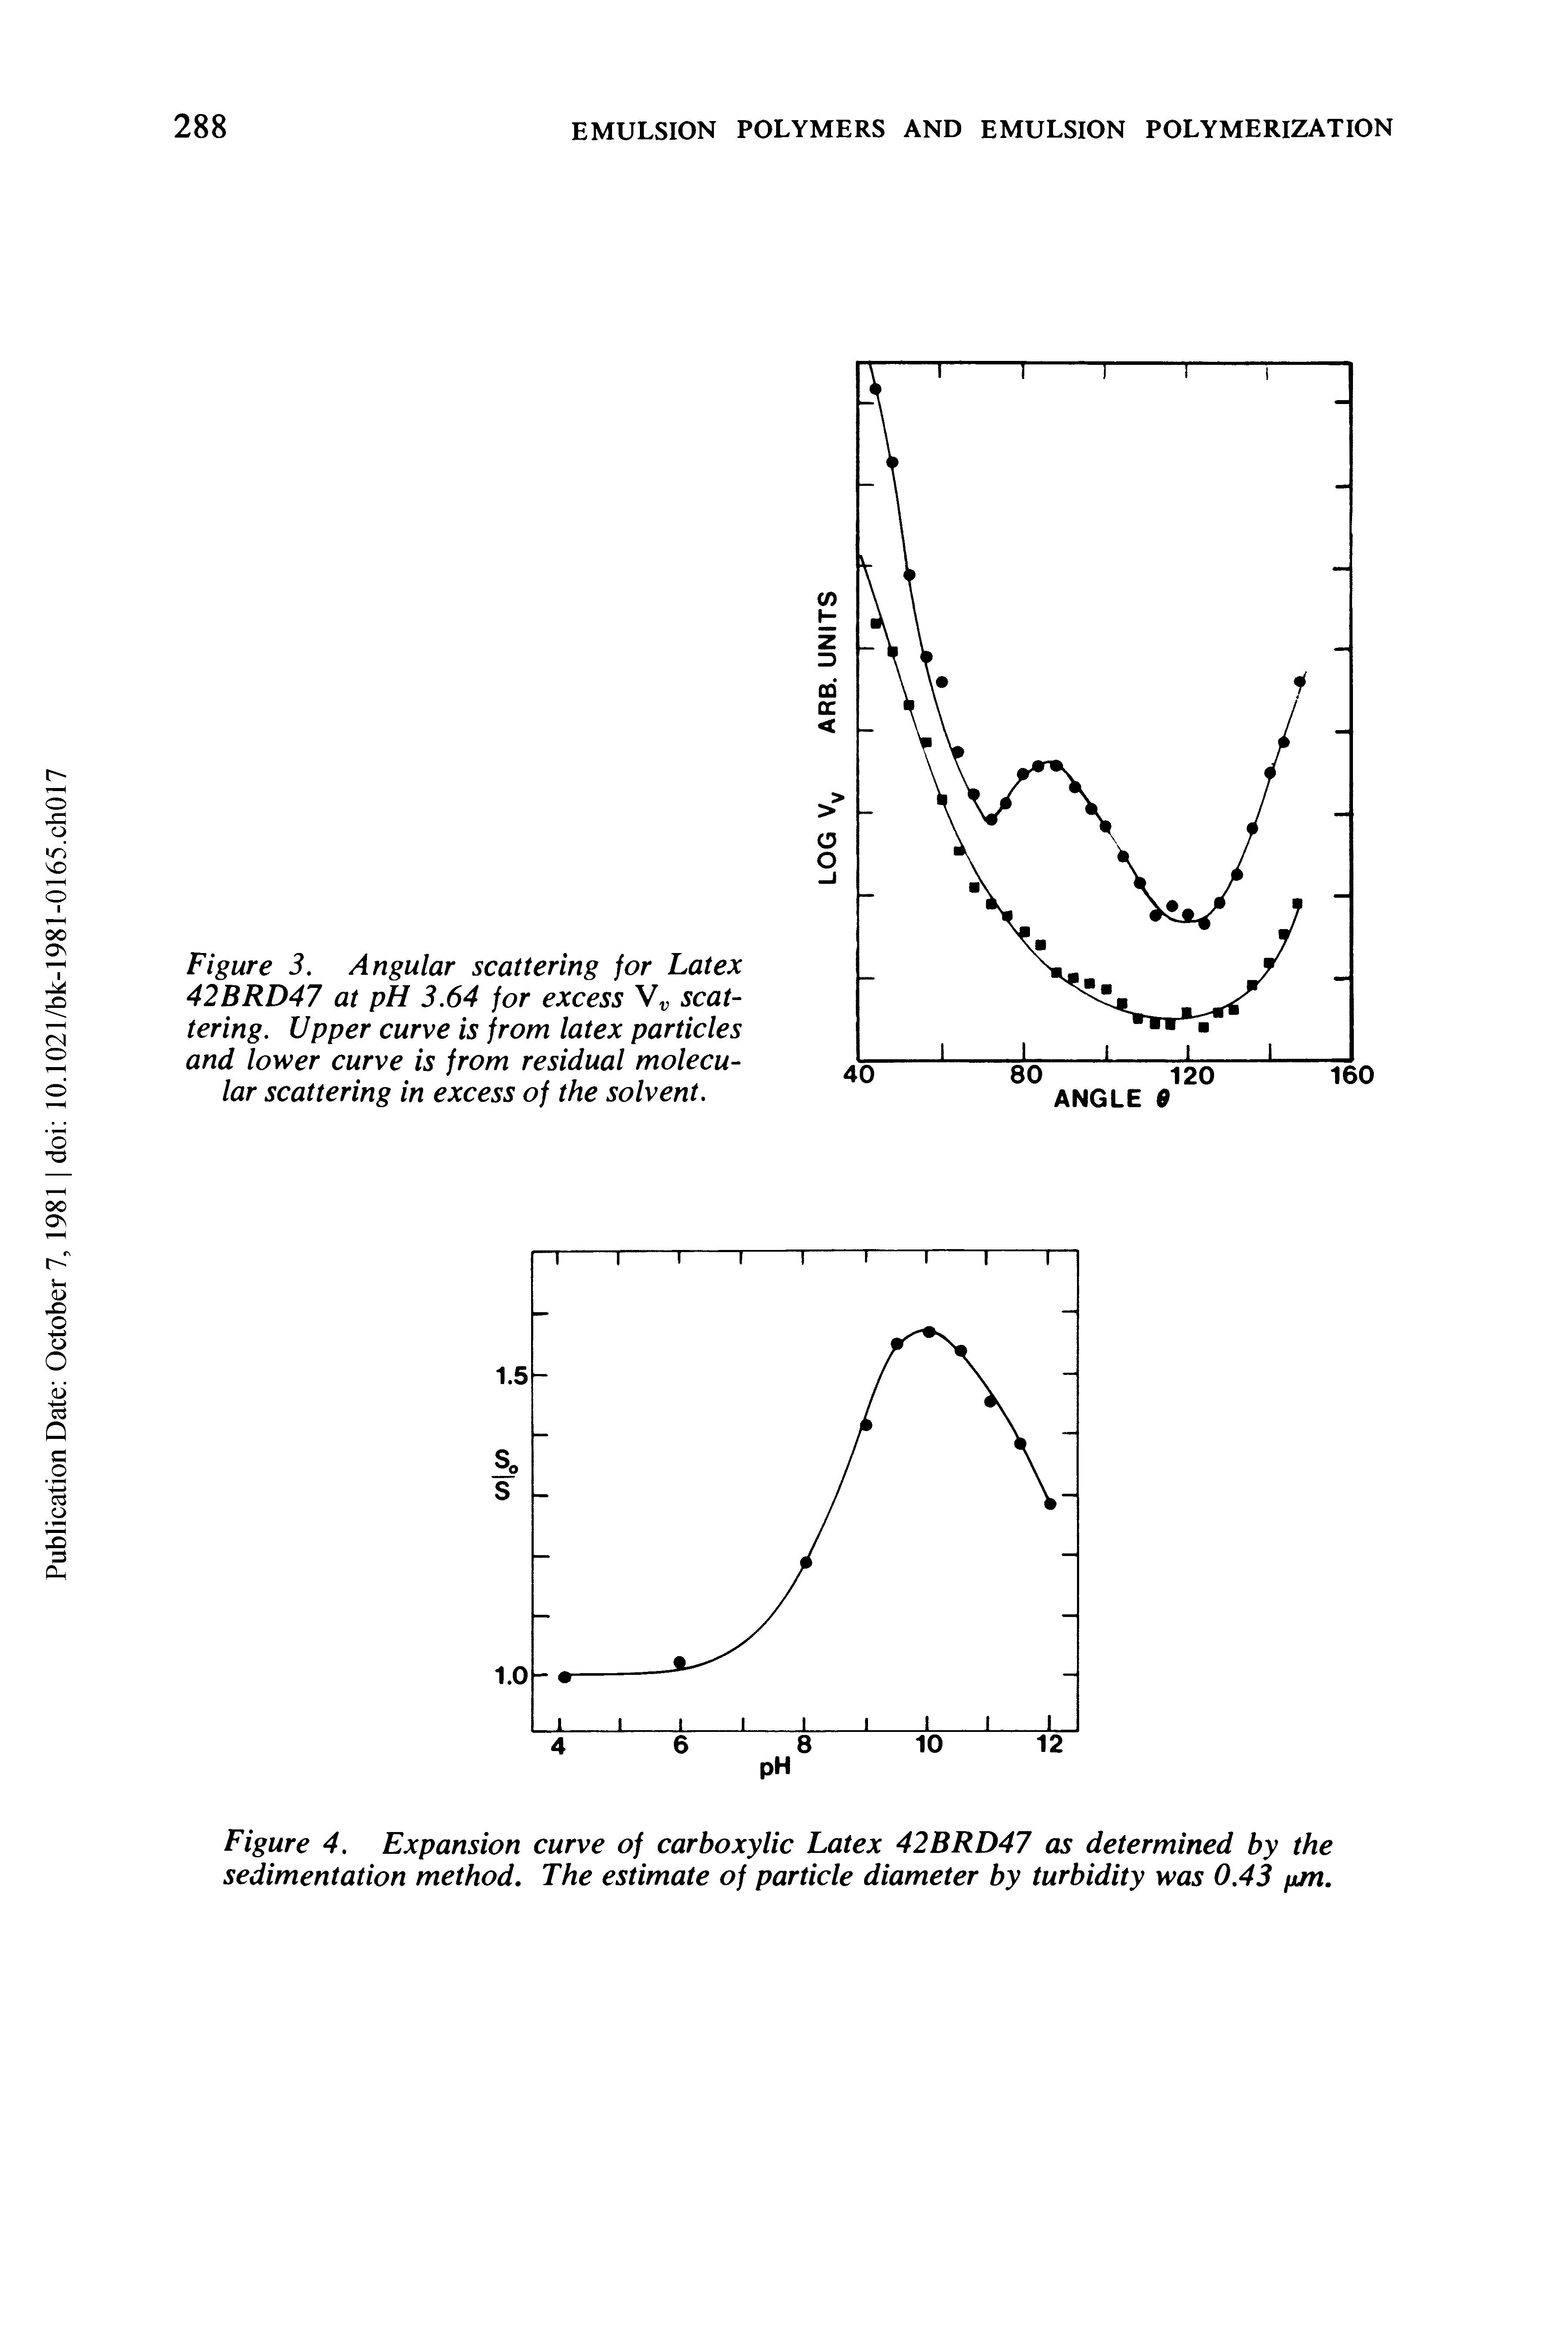 Figure 4. Expansion curve of carboxylic Latex 42BRD47 as determined by the sedimentation method. The estimate of particle diameter by turbidity was 0.43 pm.